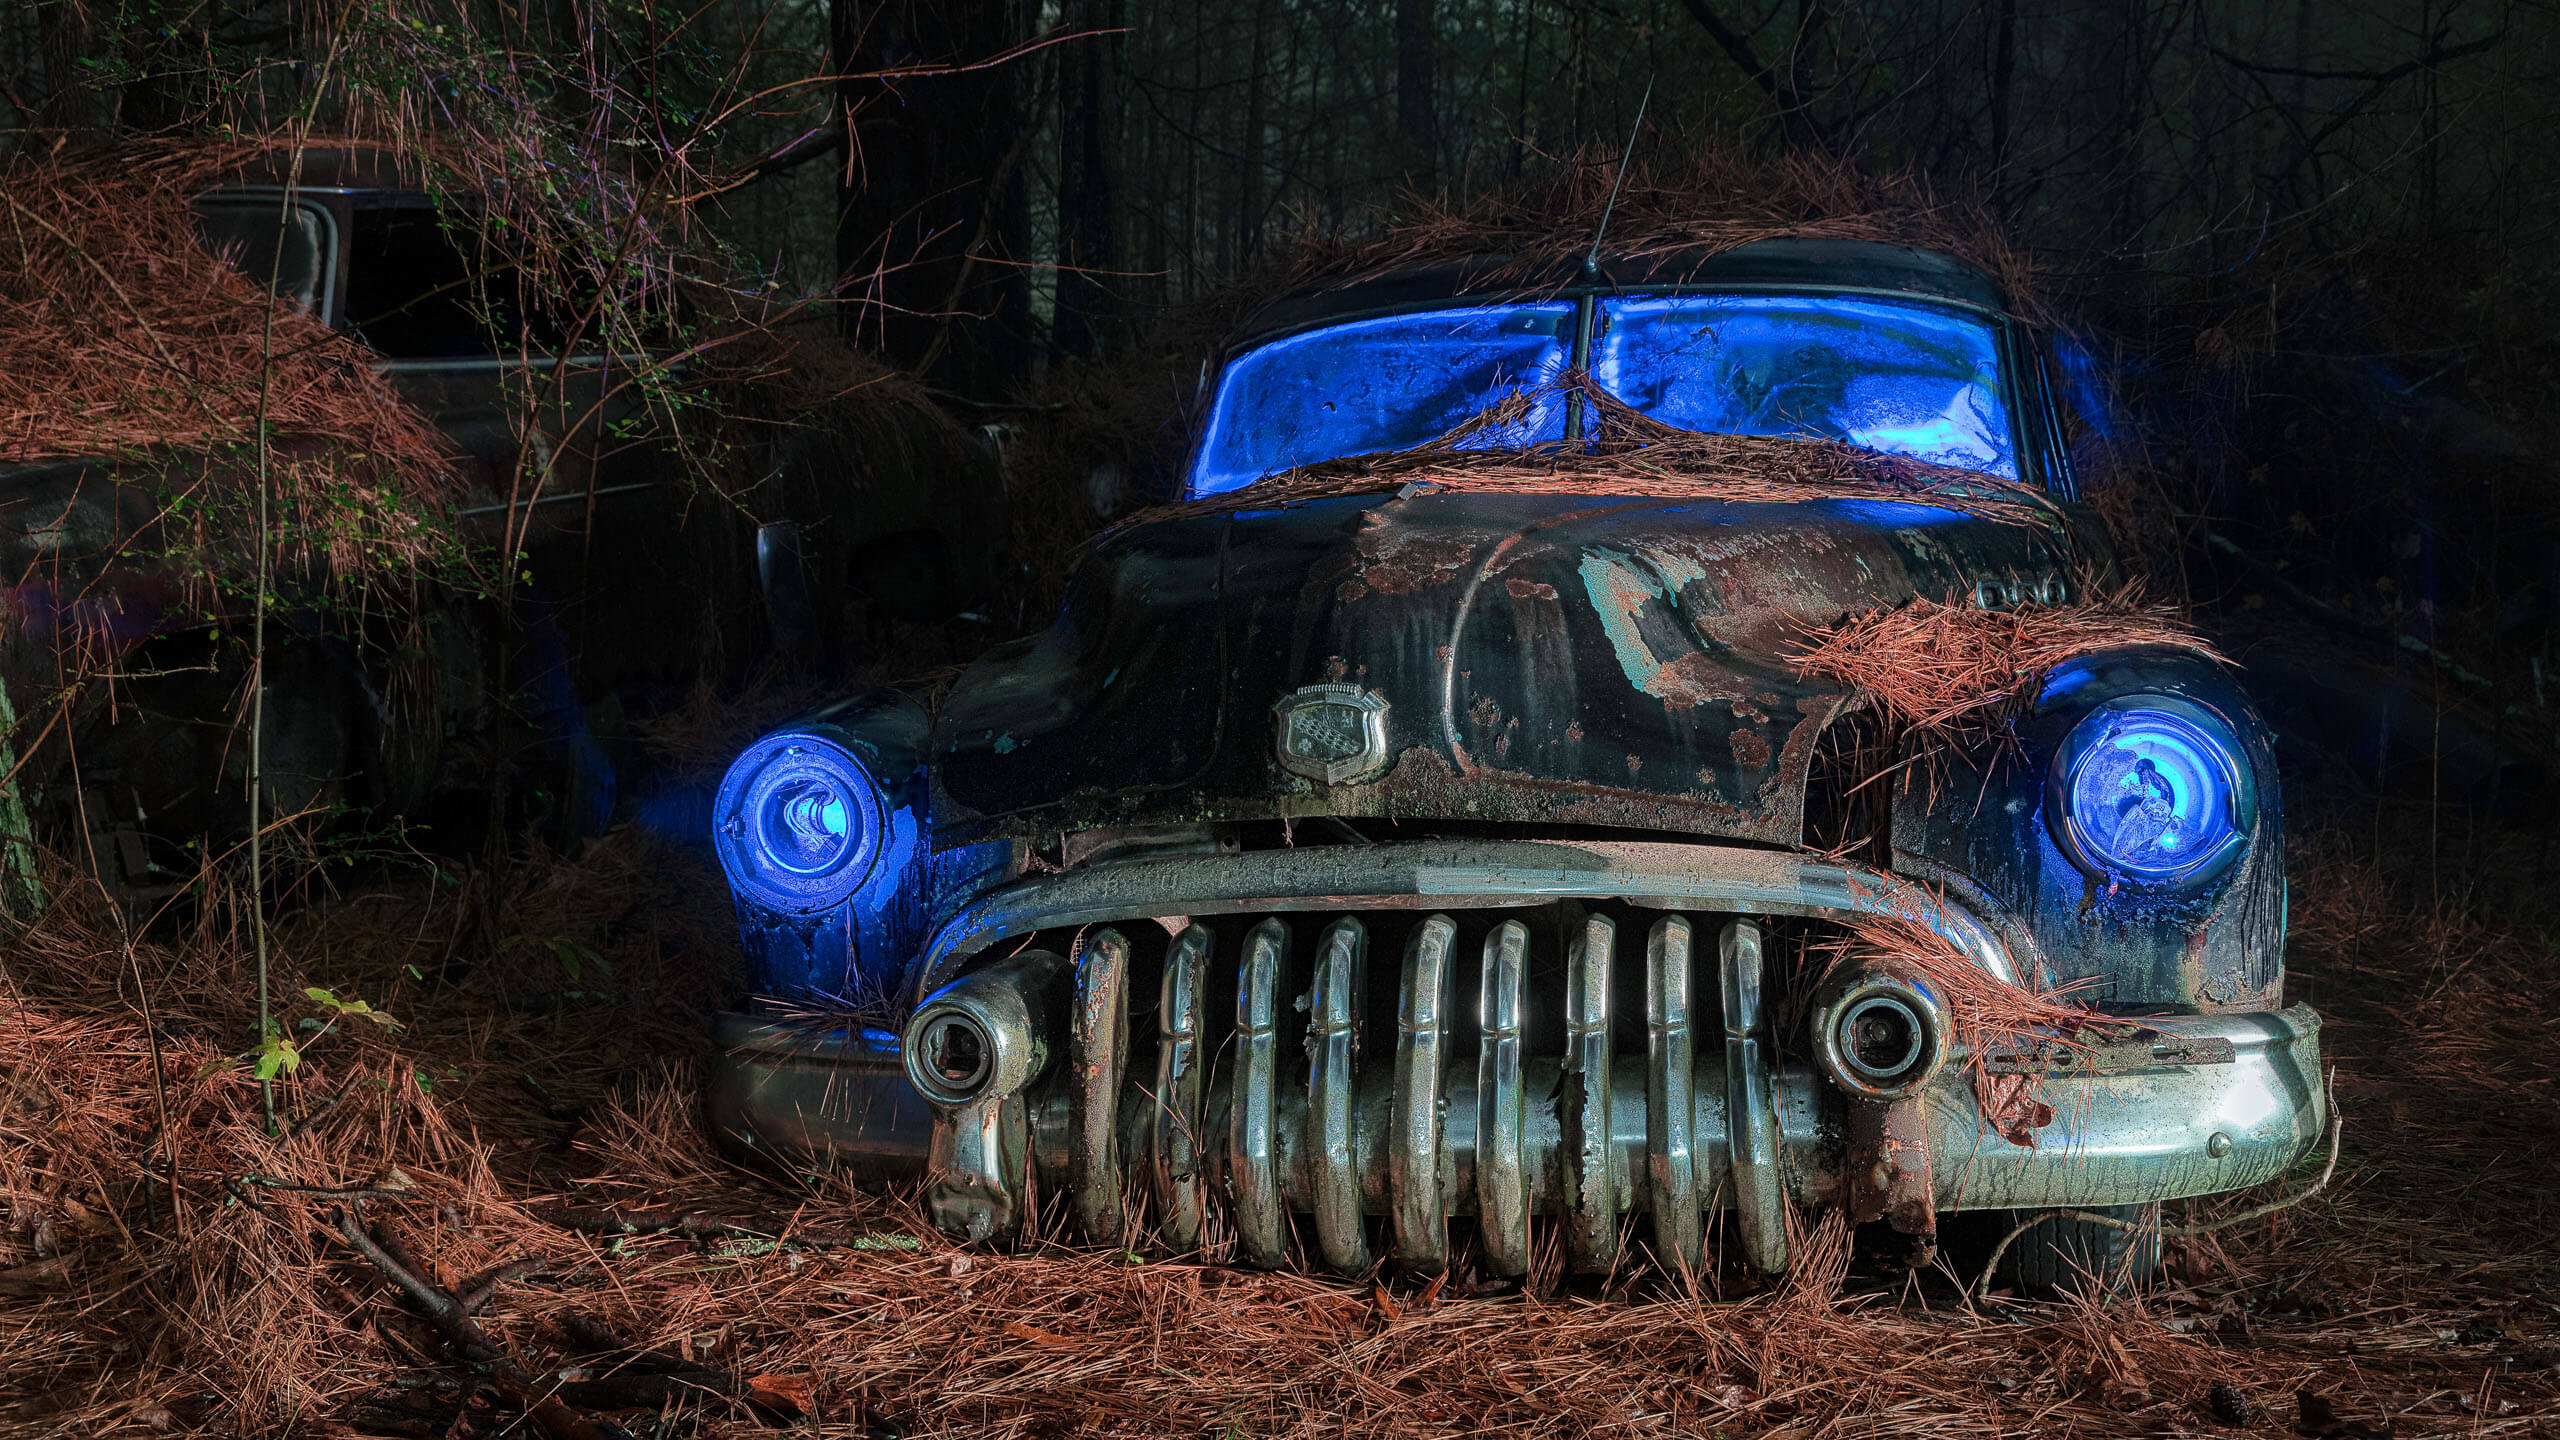 Light painting 101: How to light paint a vintage vehicle in four steps